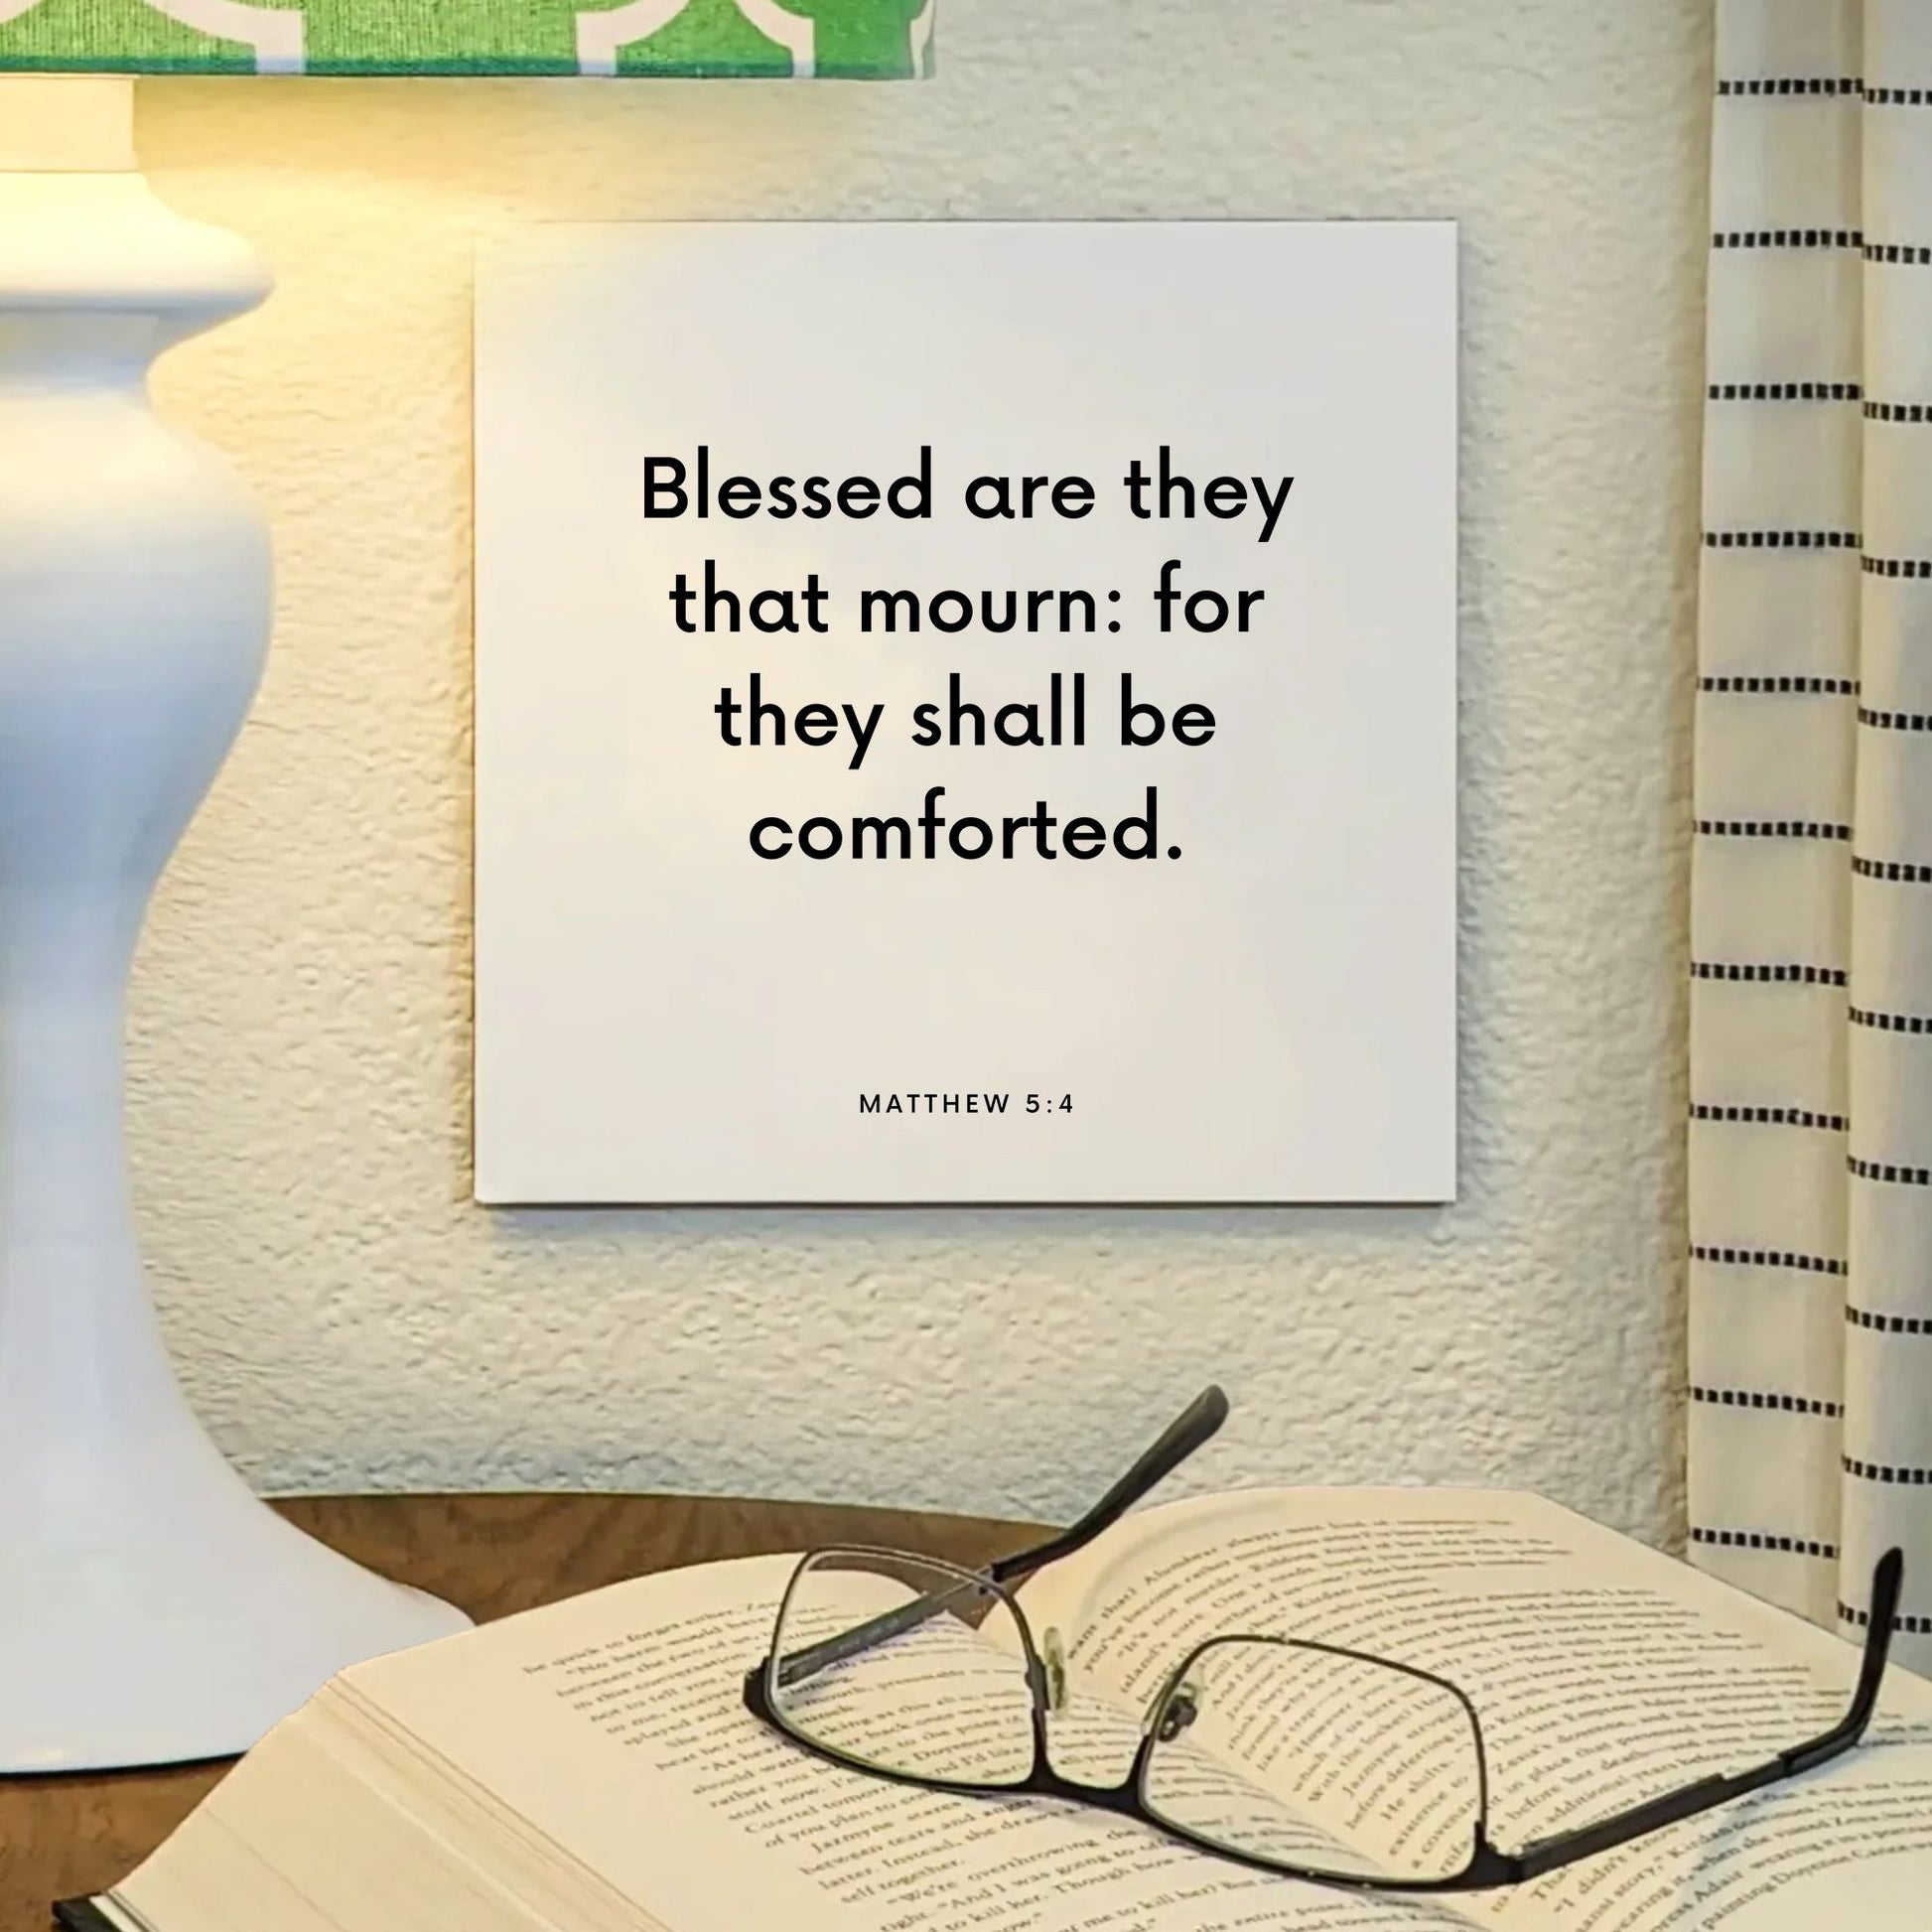 Lamp mouting of the scripture tile for Matthew 5:4 - "Blessed are they that mourn: for they shall be comforted"